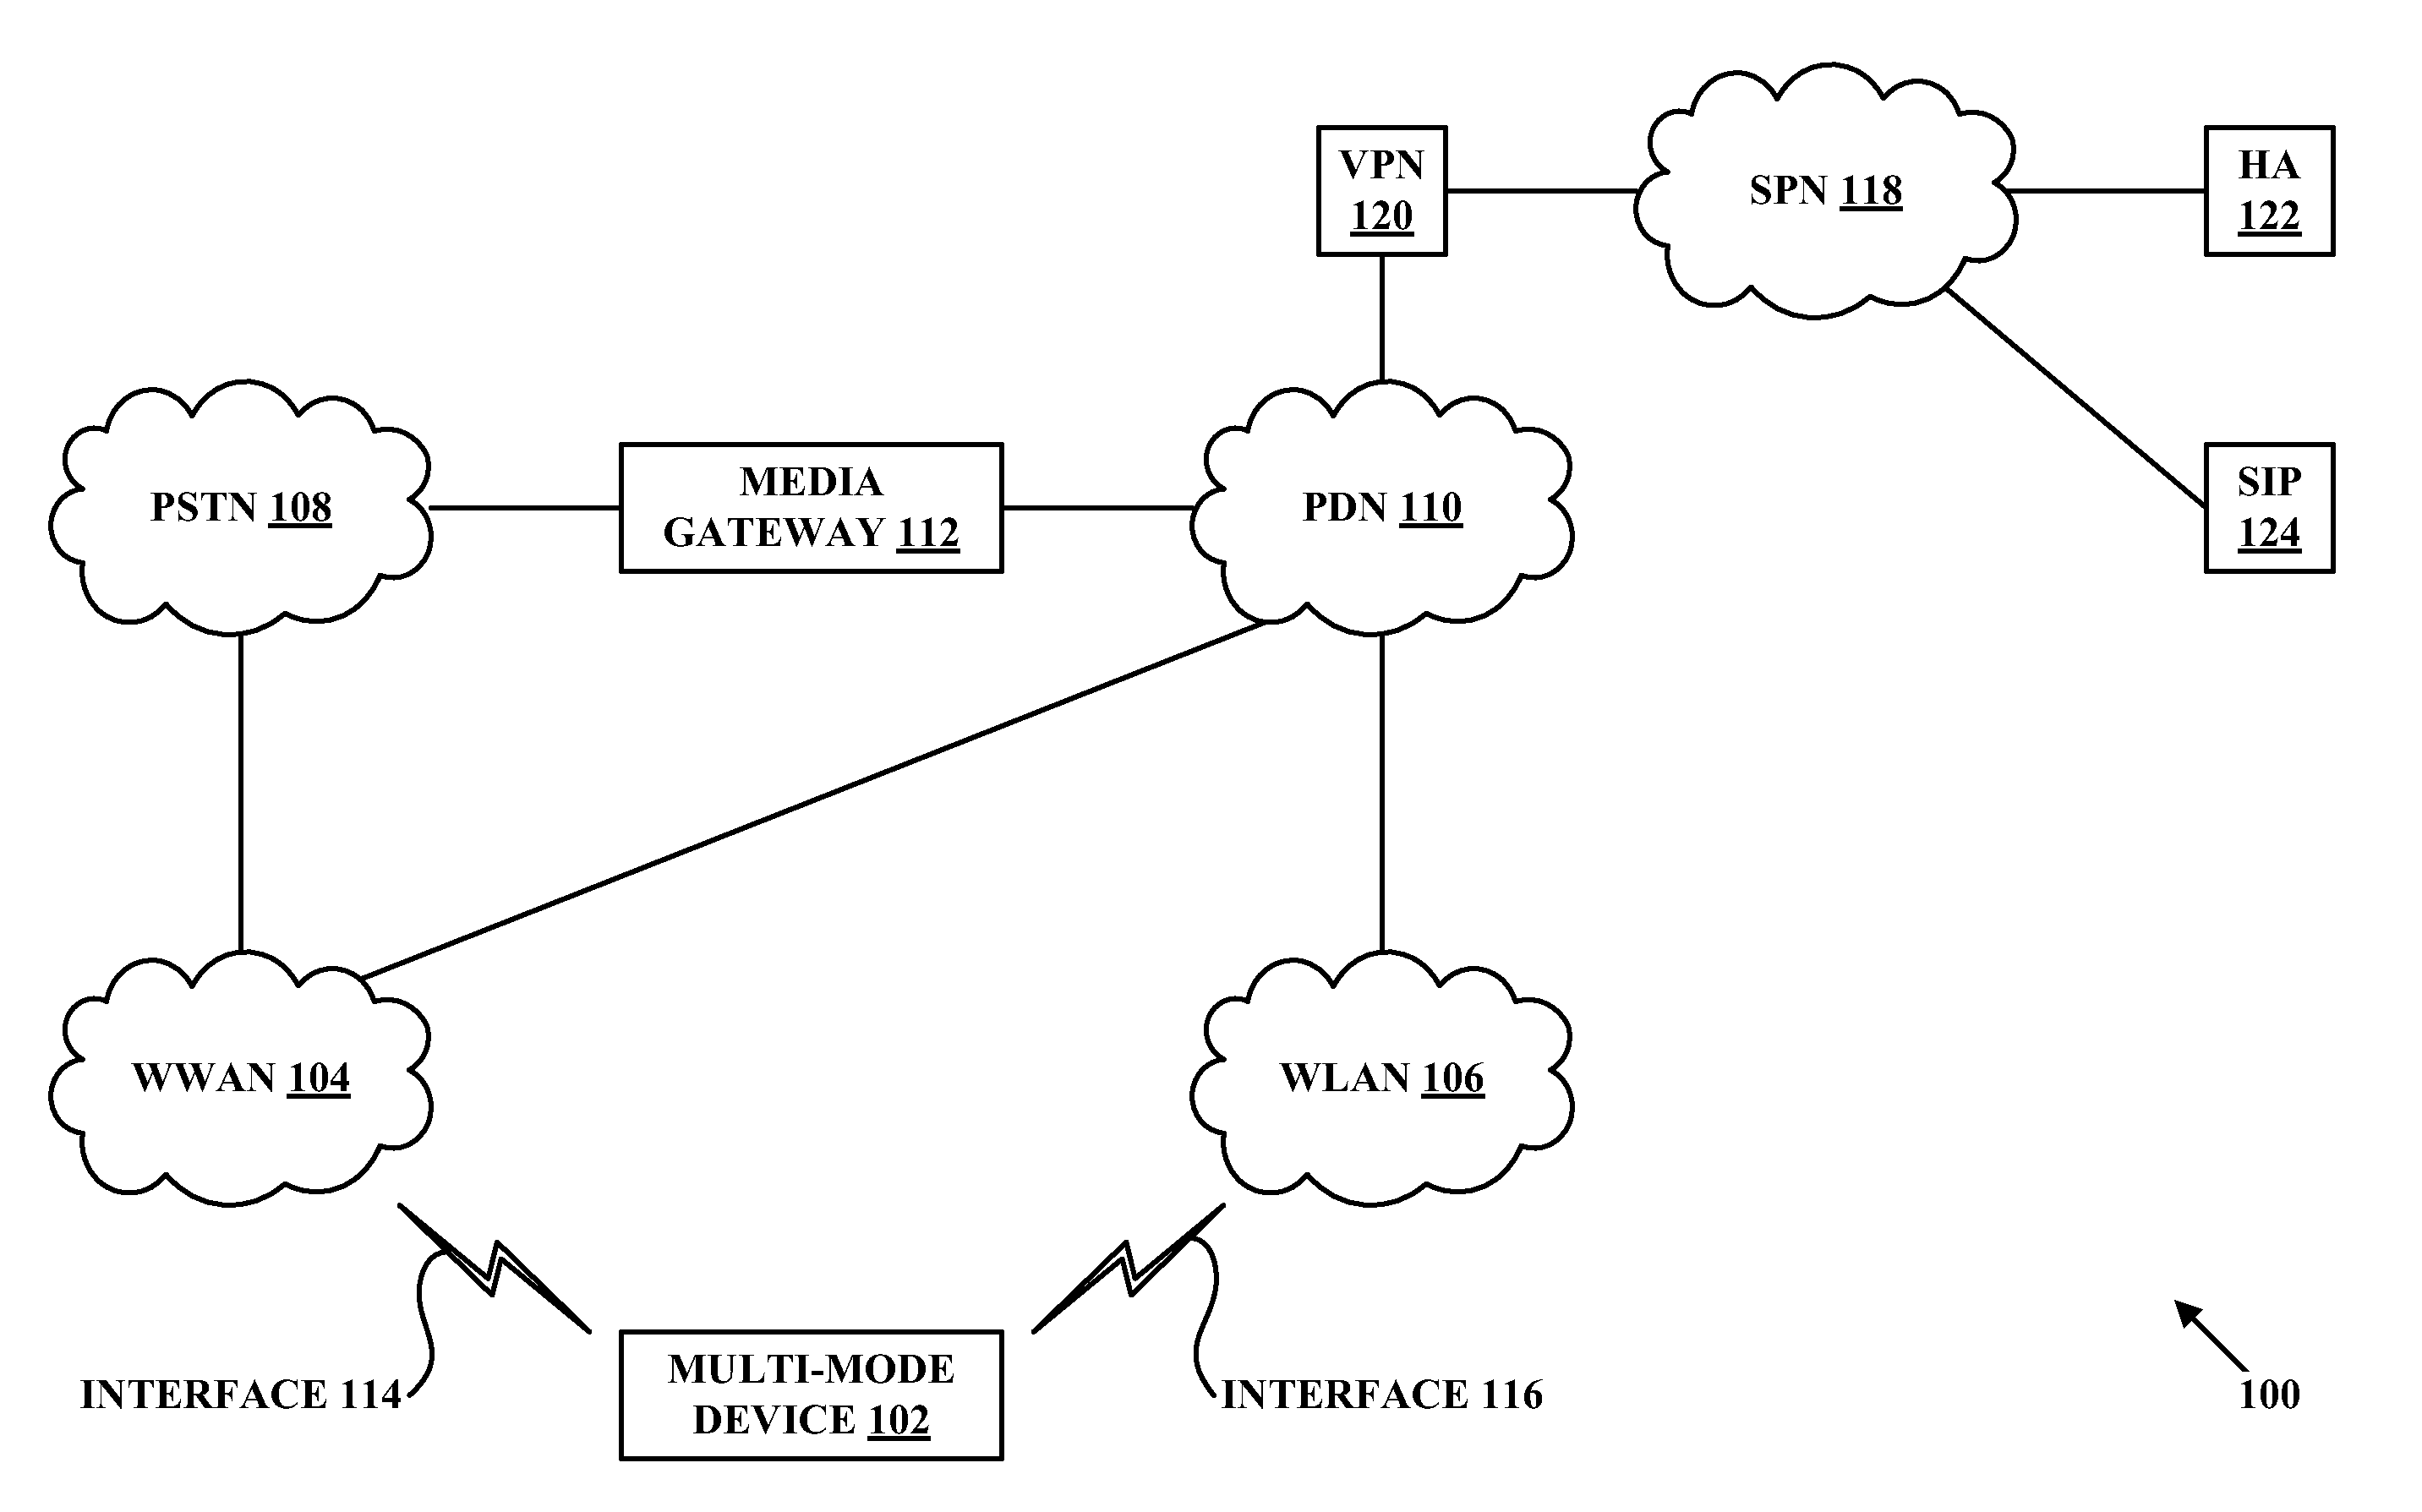 Selective scanning for WLAN coverage by a multi-mode device